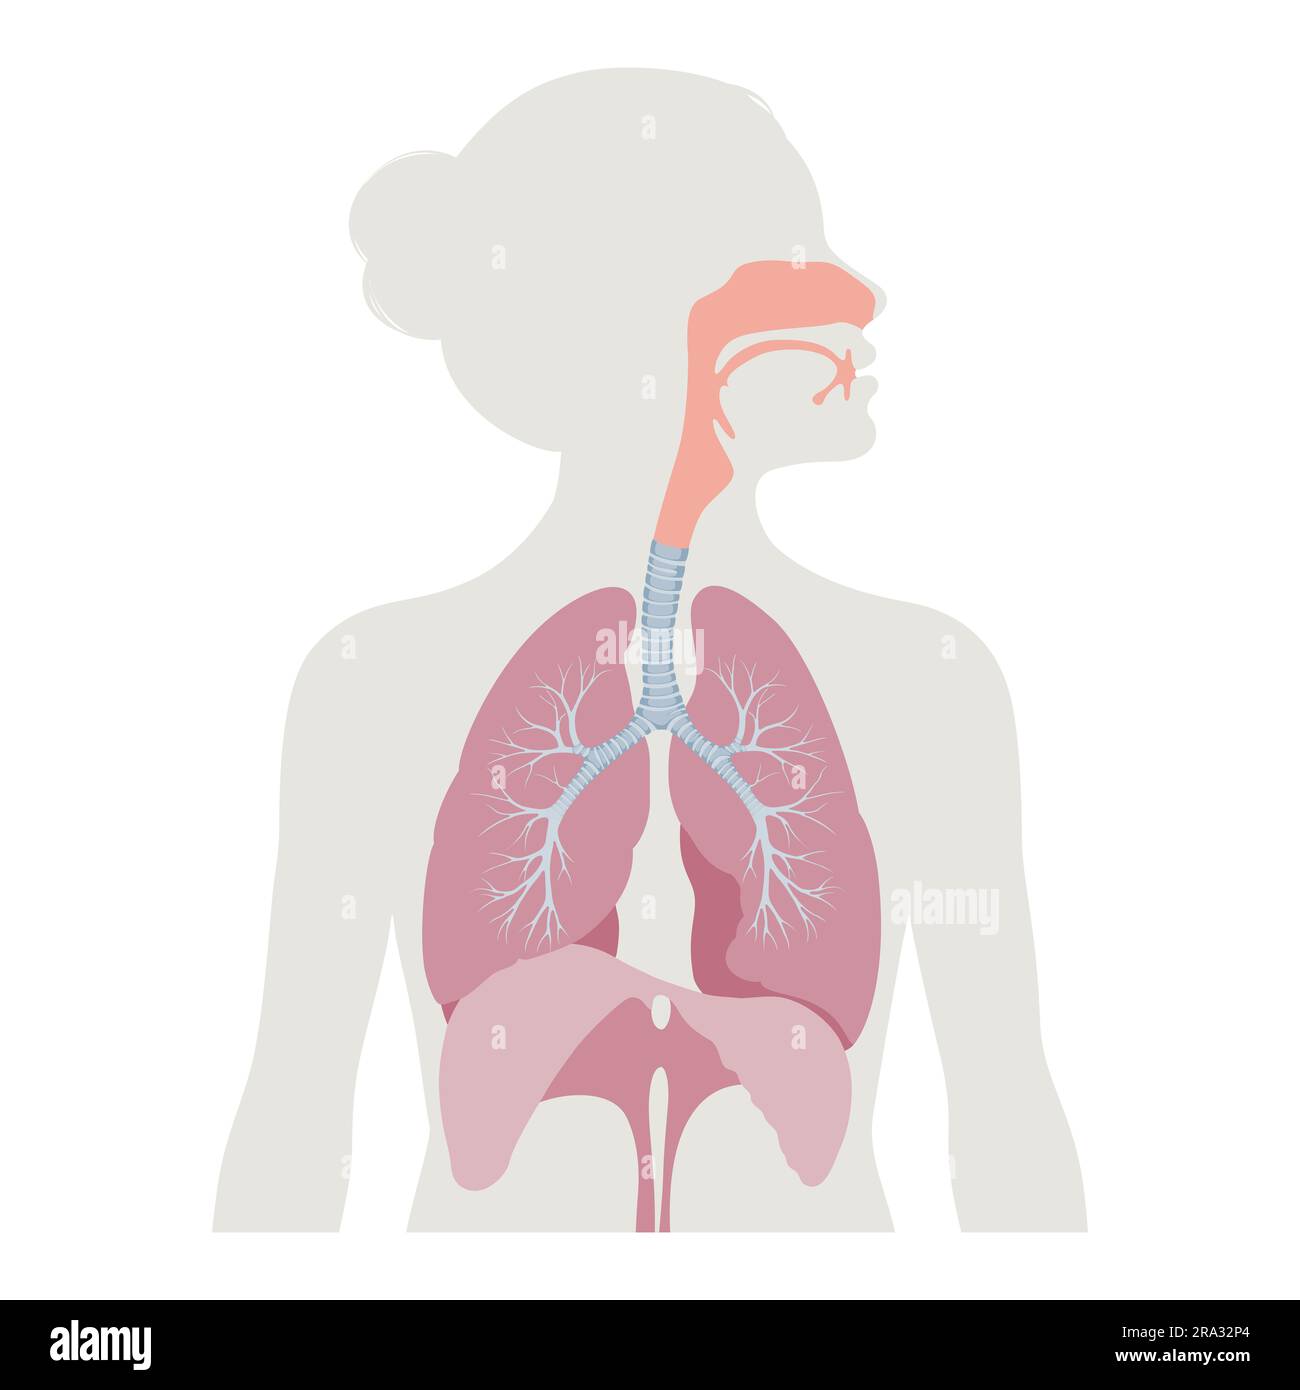 Illustration of the respiratory system Stock Photo